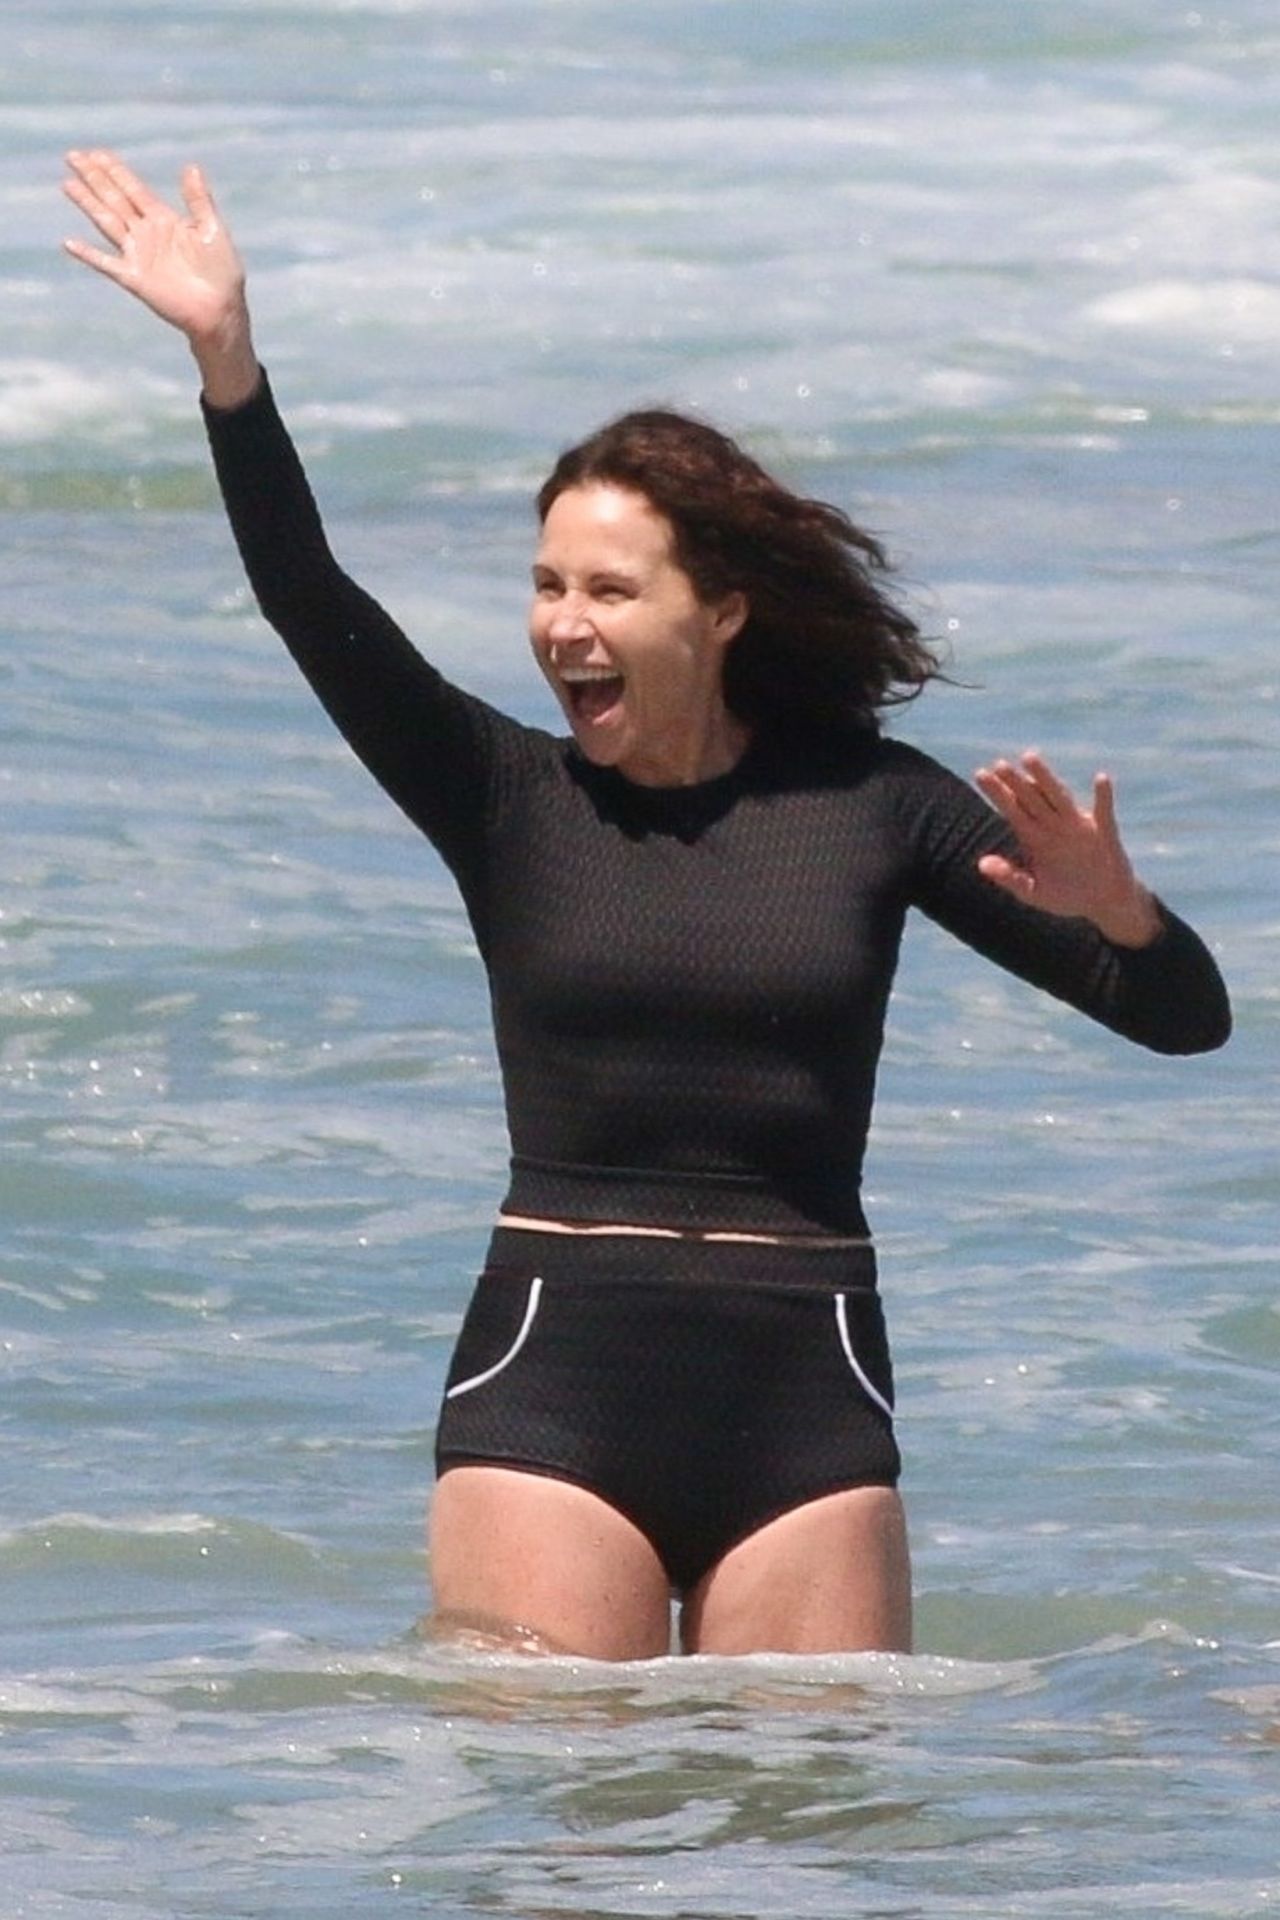 Aging Hottie Minnie Driver Shows Her Sexy, Mature Physique on the Beach